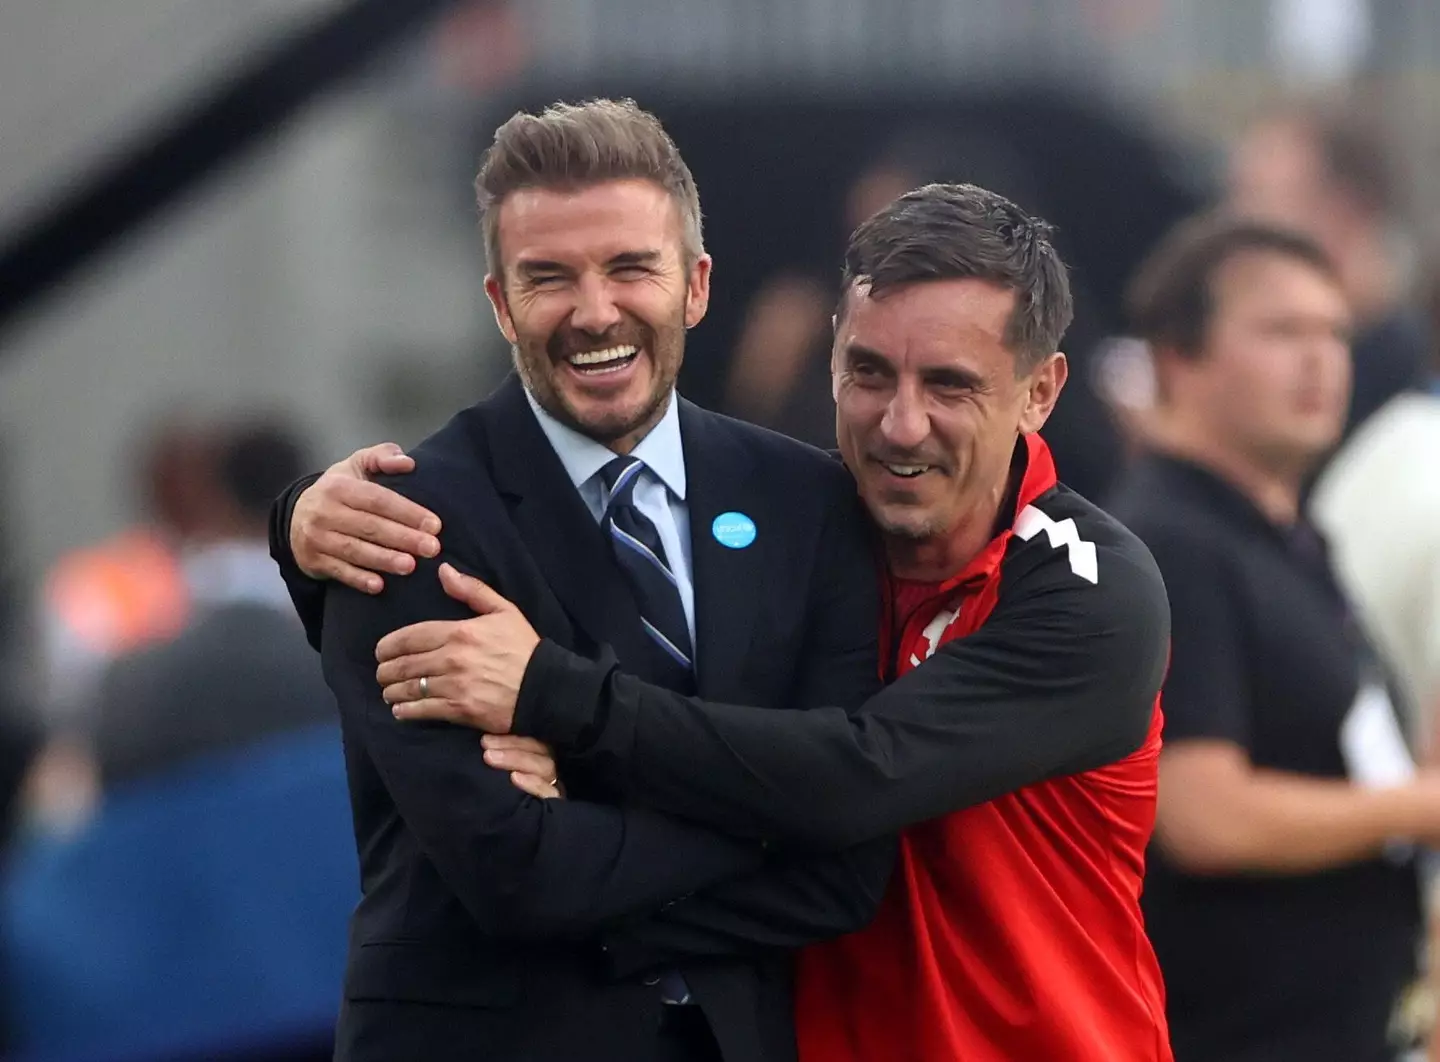 David Beckham and Gary Neville are just two of the high-profile pundits in Qatar.